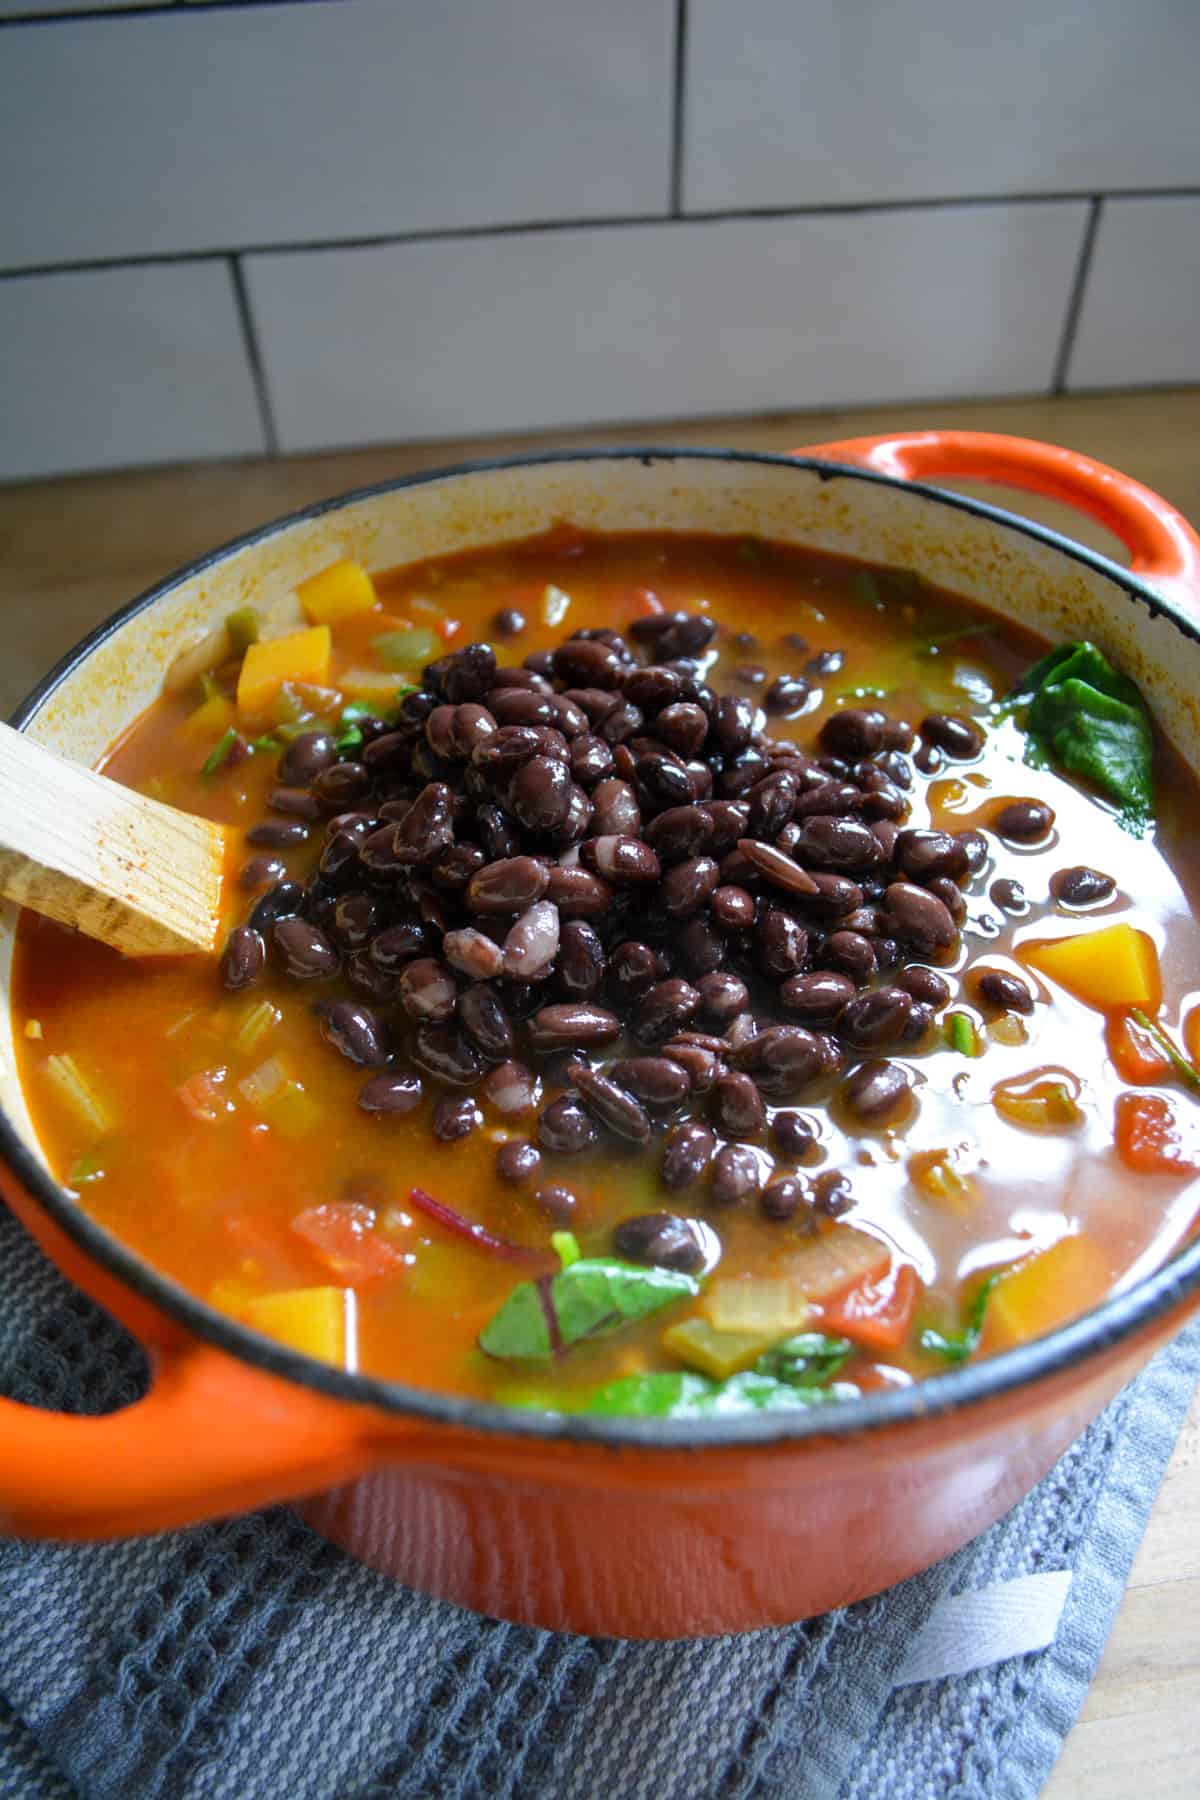 Black beans added into the soup.